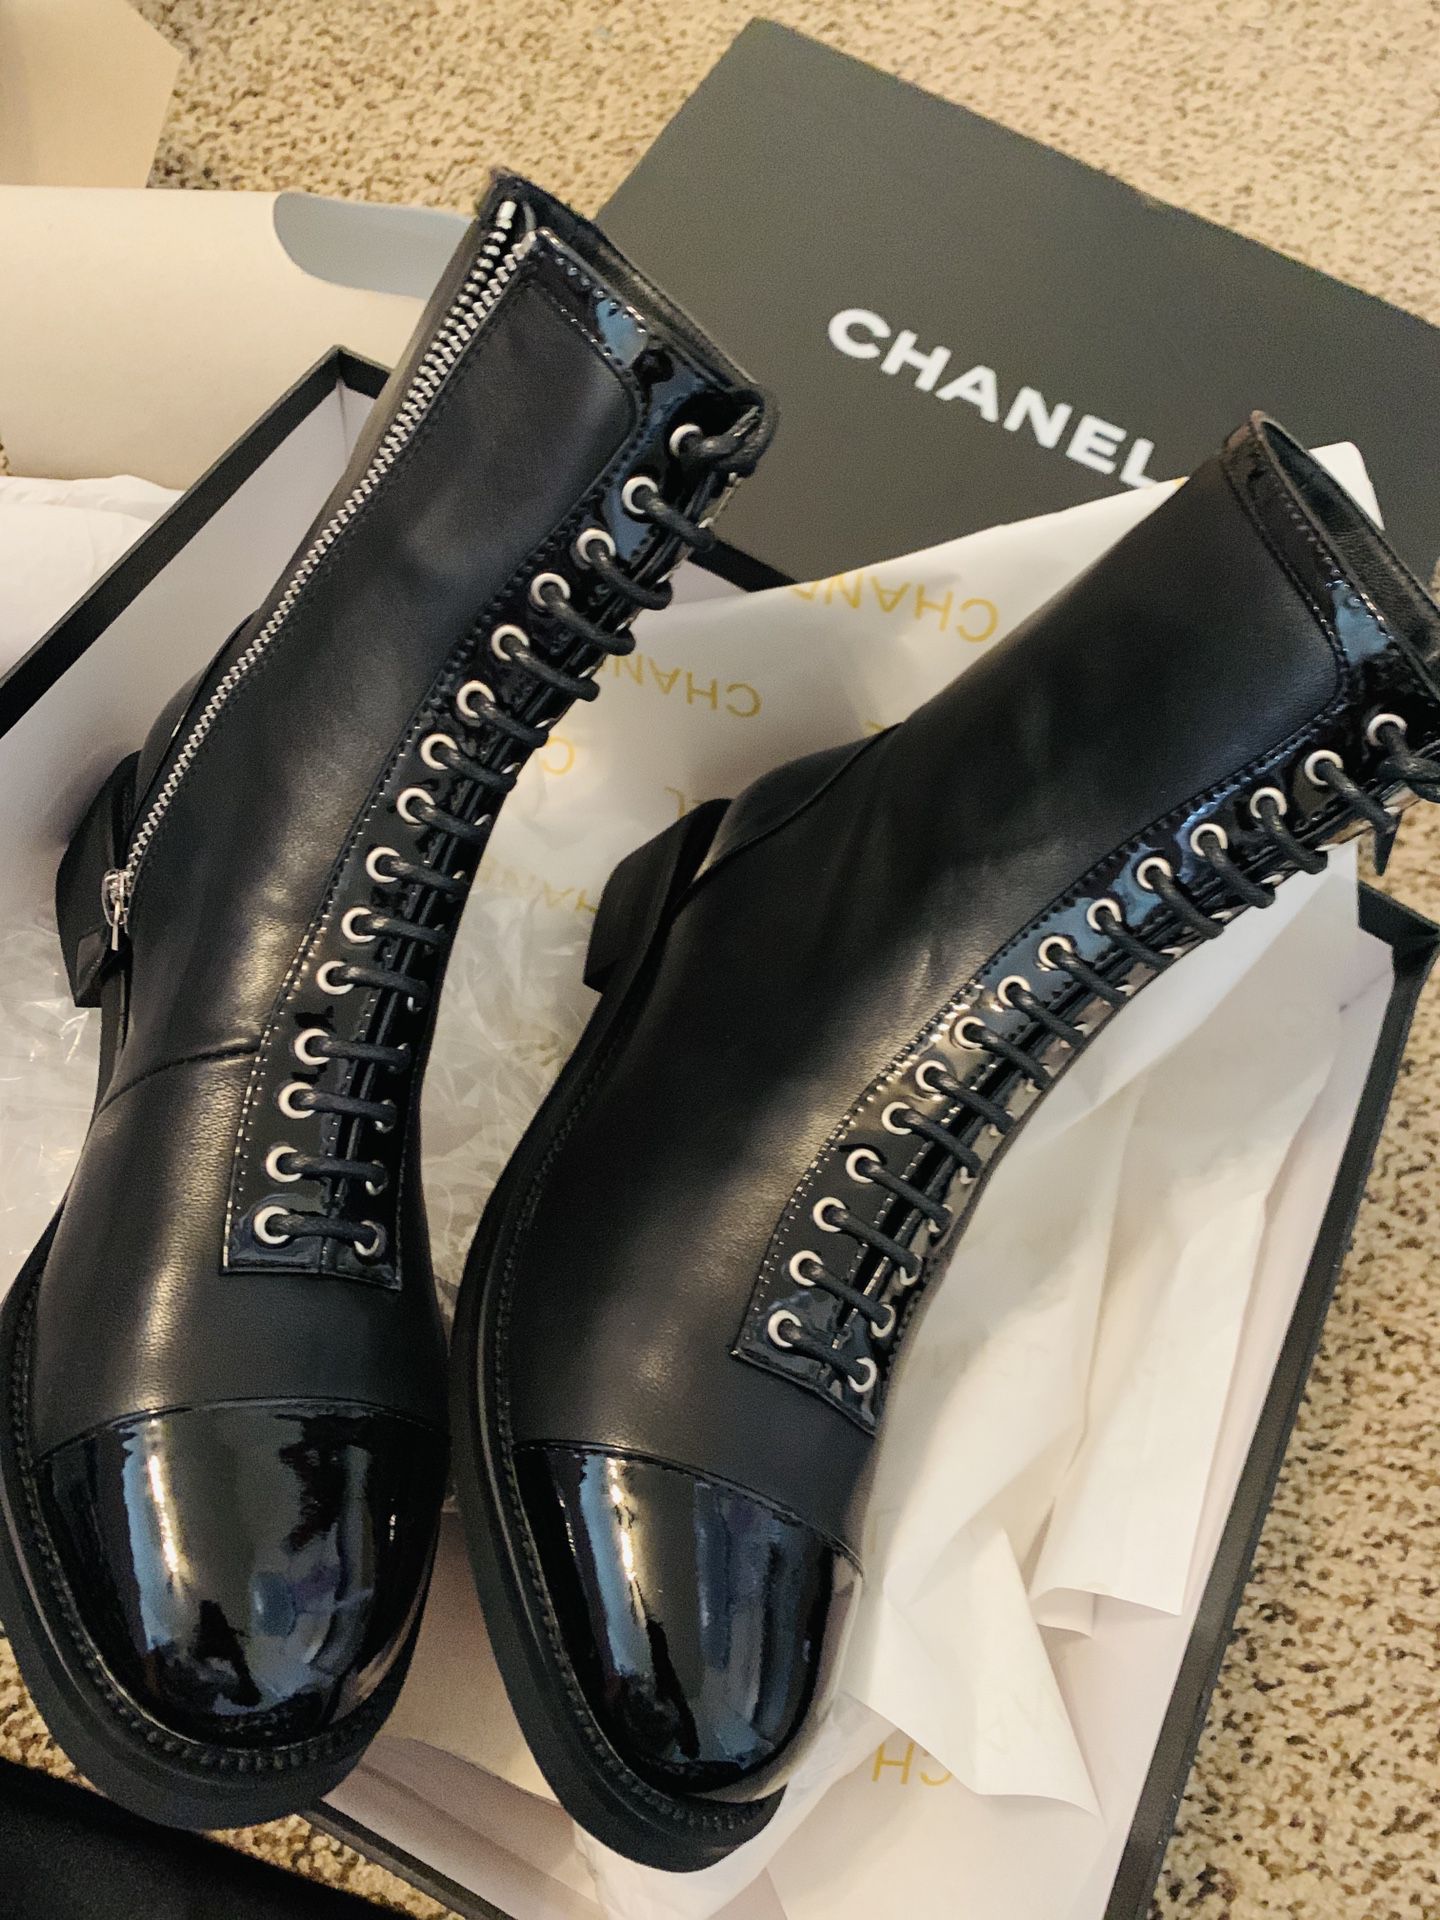 Chanel shoes boot brand new size 37C